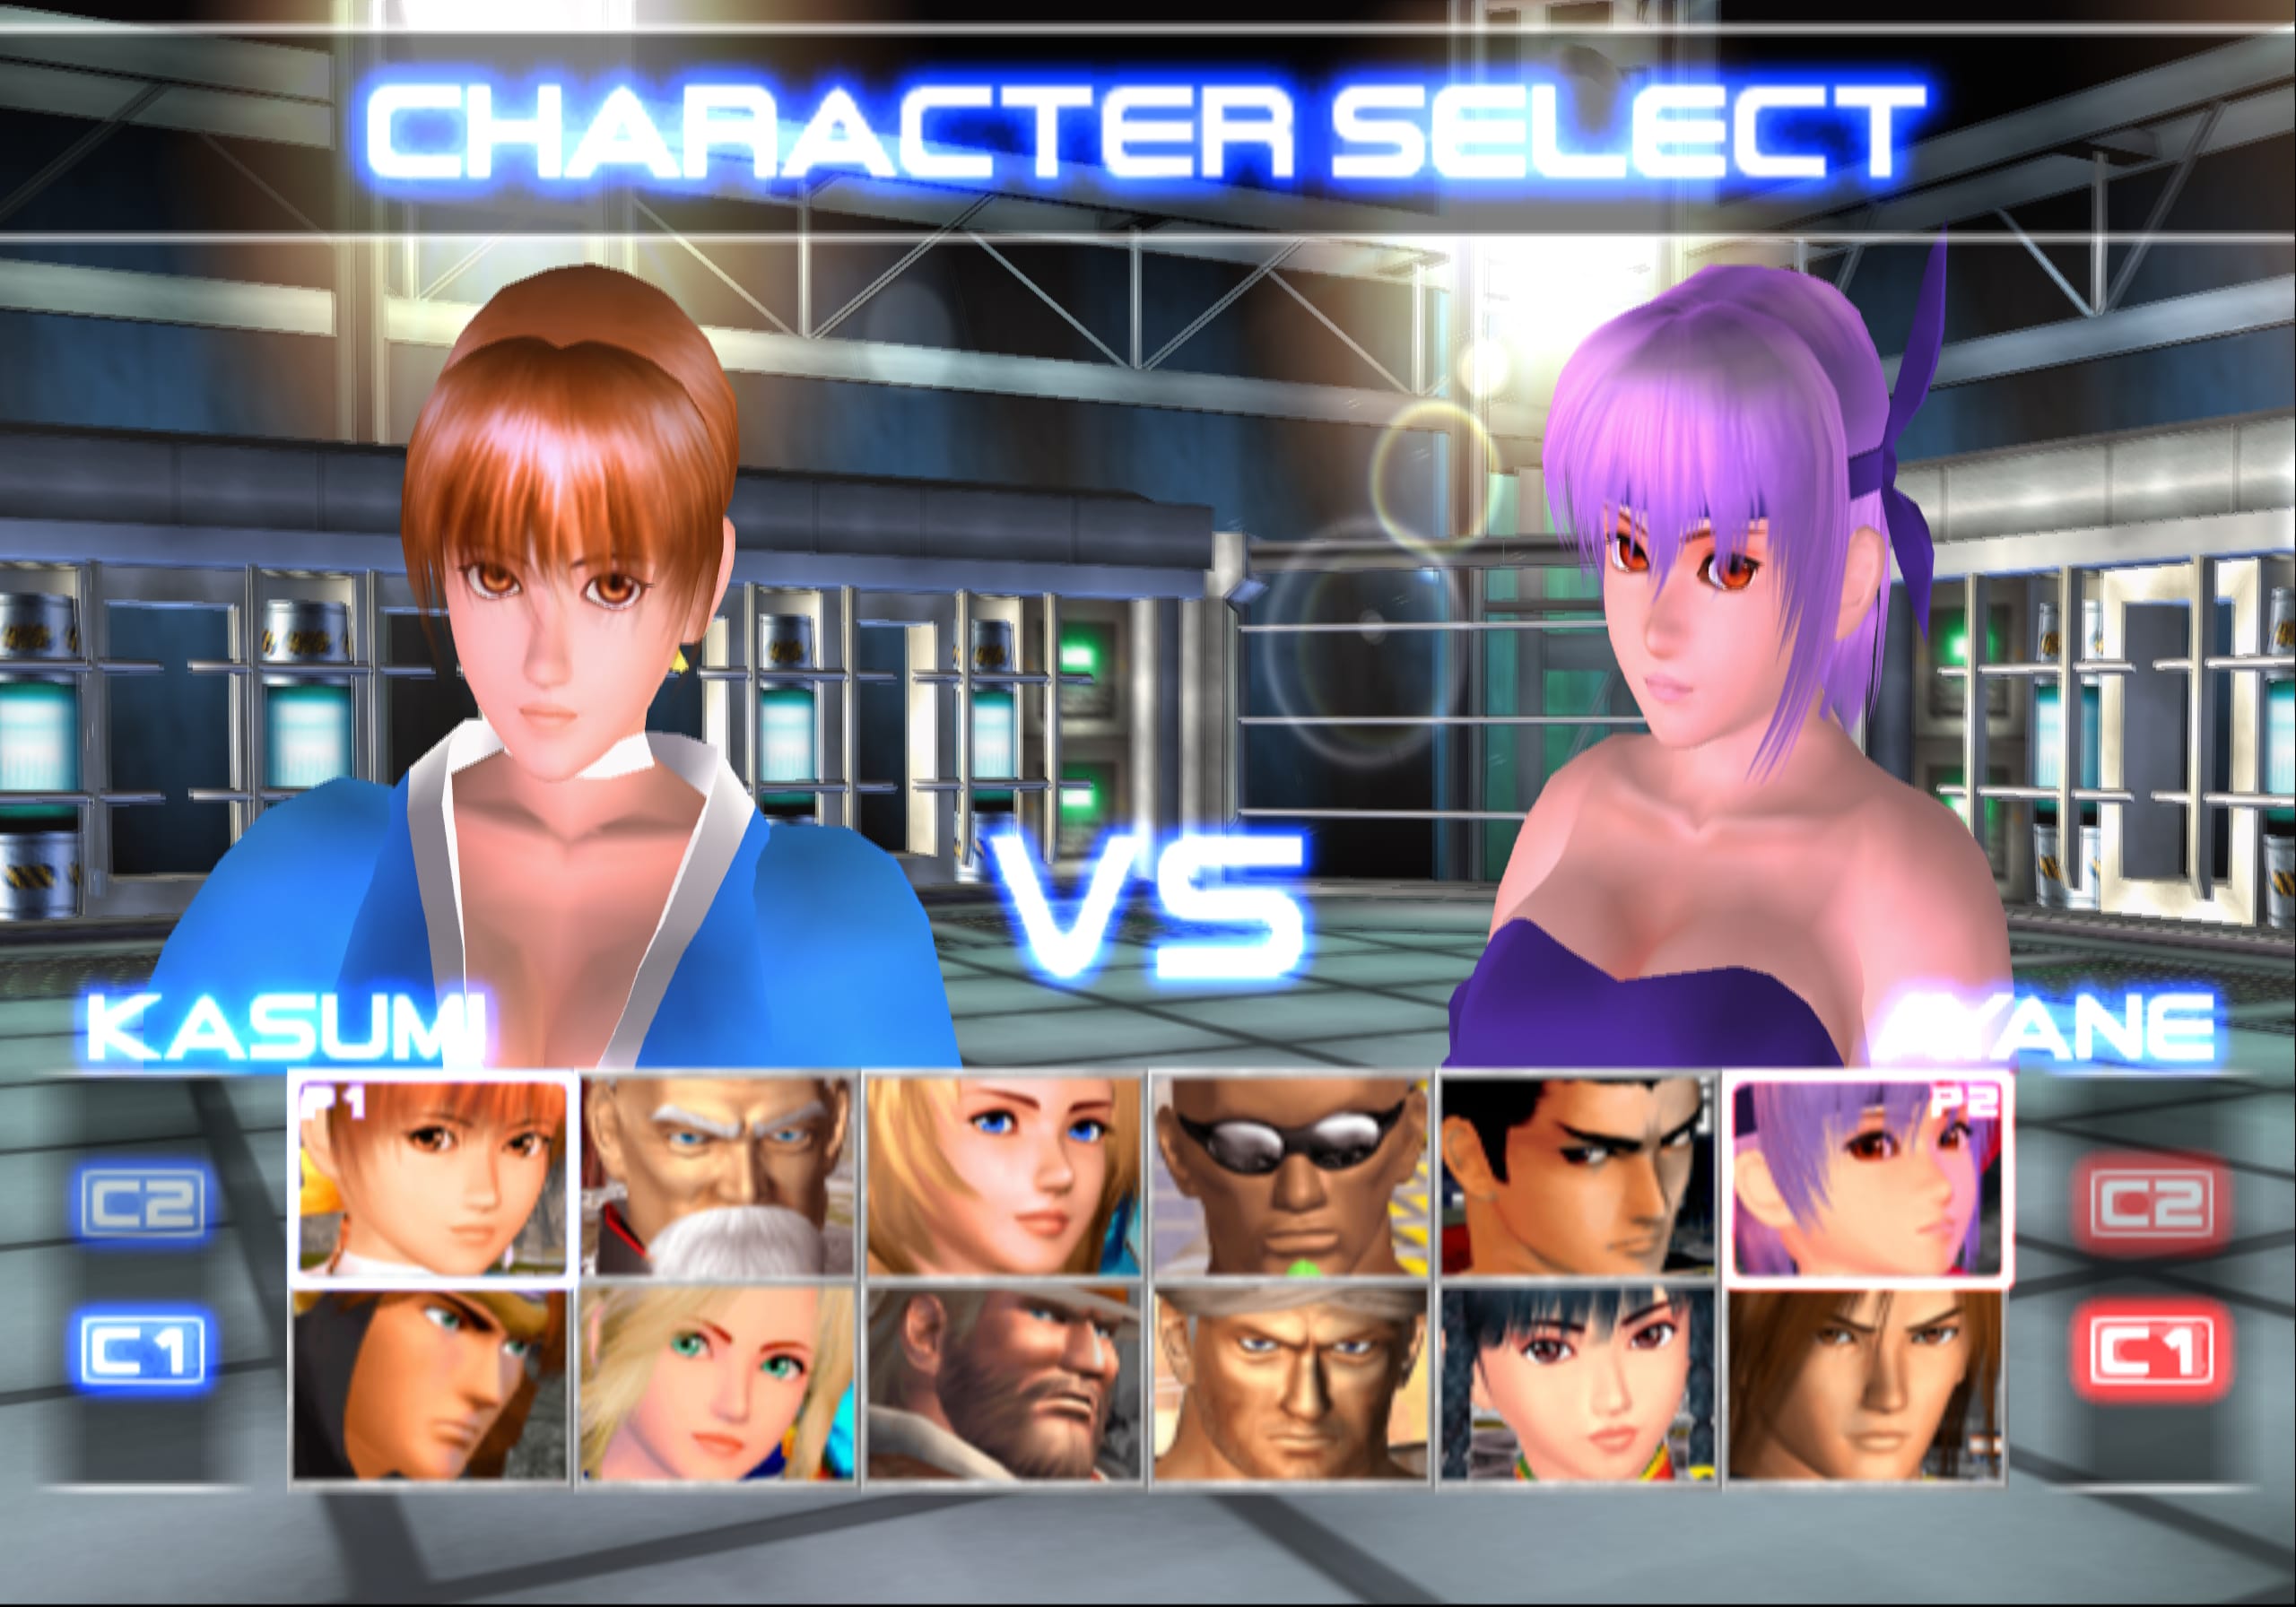 Dog or alive демо. Dead or Alive 2. Dead or Alive 2 Dreamcast. Dead or Alive 2 ps2. Dead or Alive 2 Dreamcast обложка.